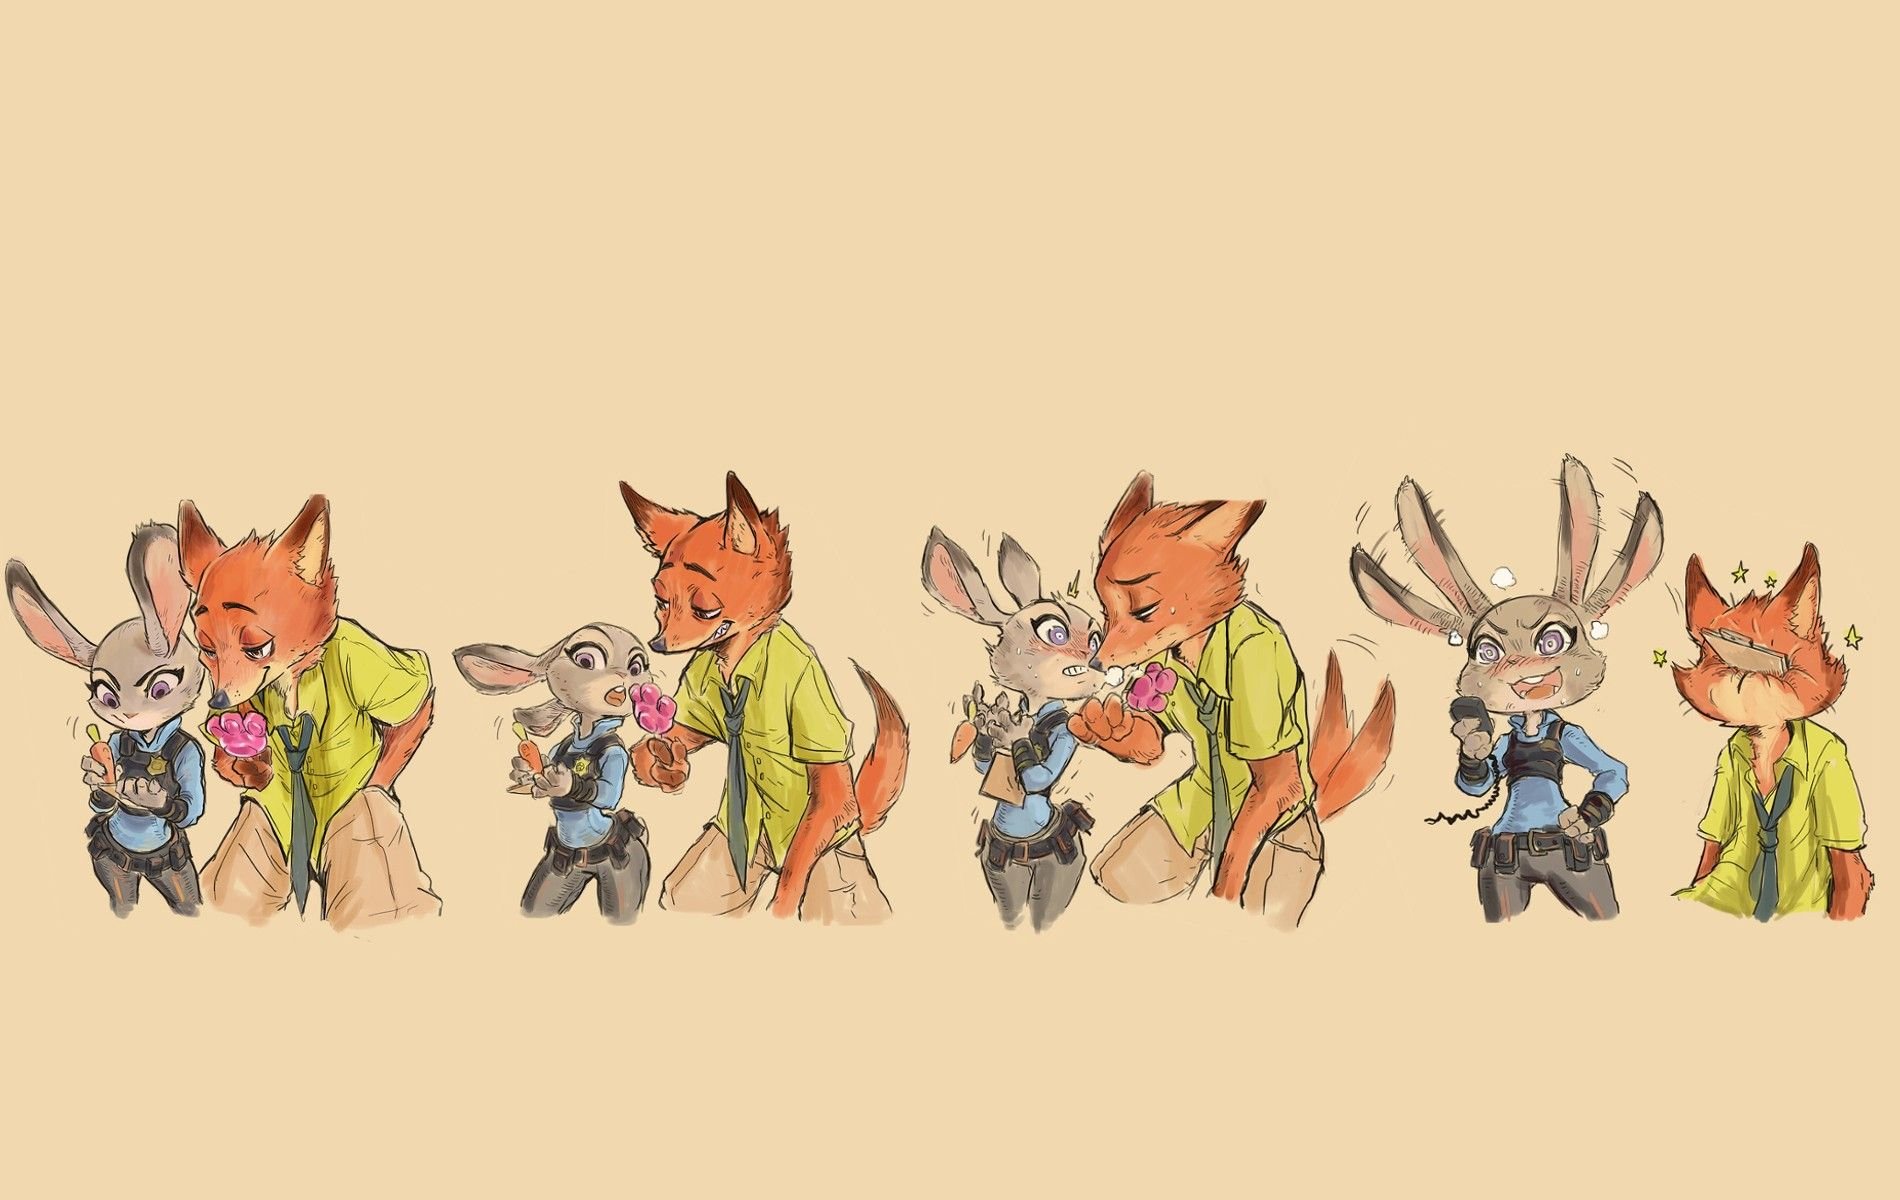 #sketches, #simple background, #Zootopia, #Judy Hopps